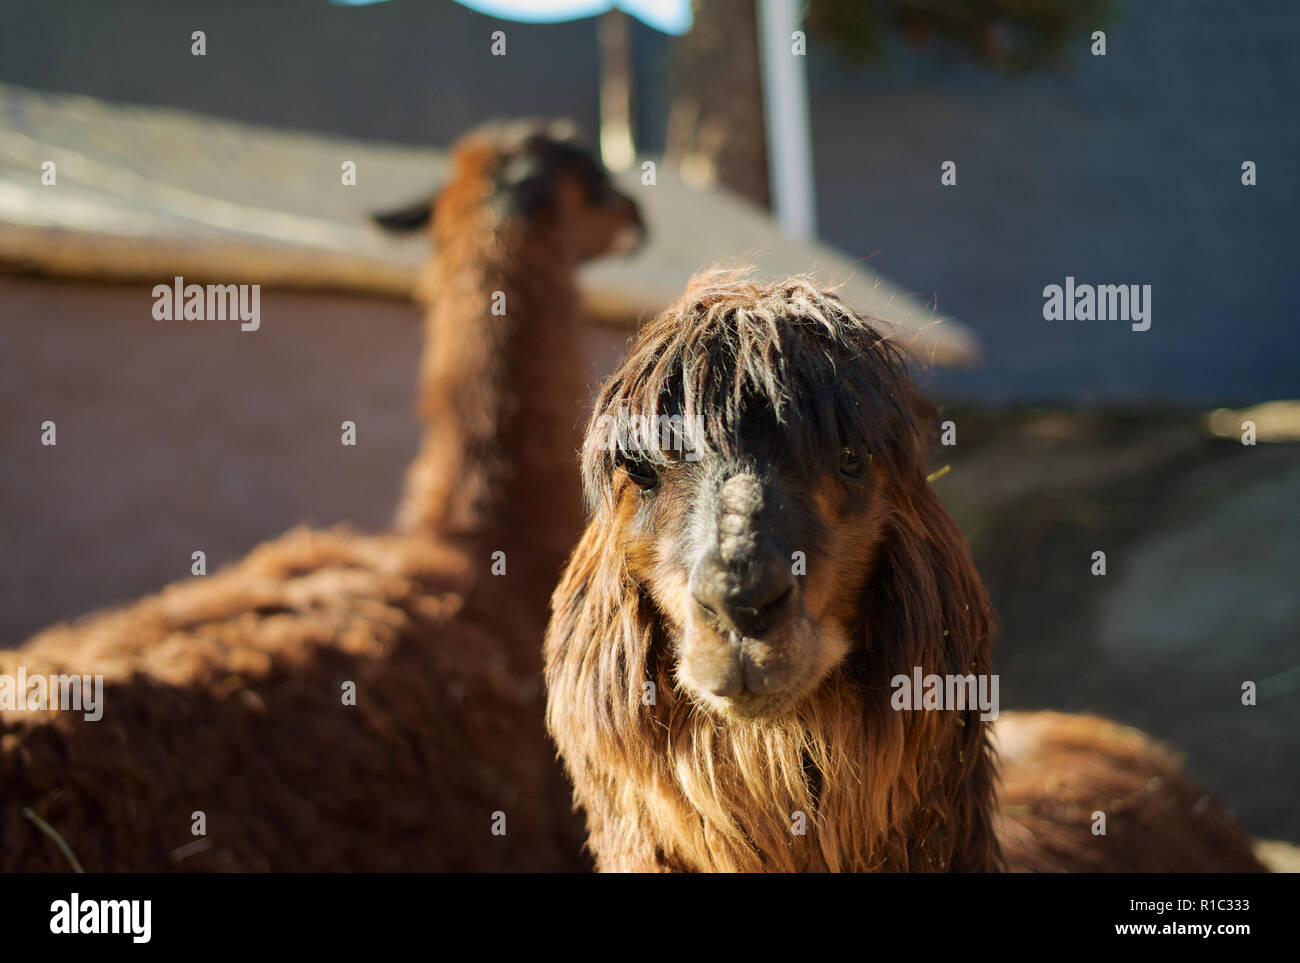 The Head of a Cute and Funny Looking Brown Alpaca Stock Photo